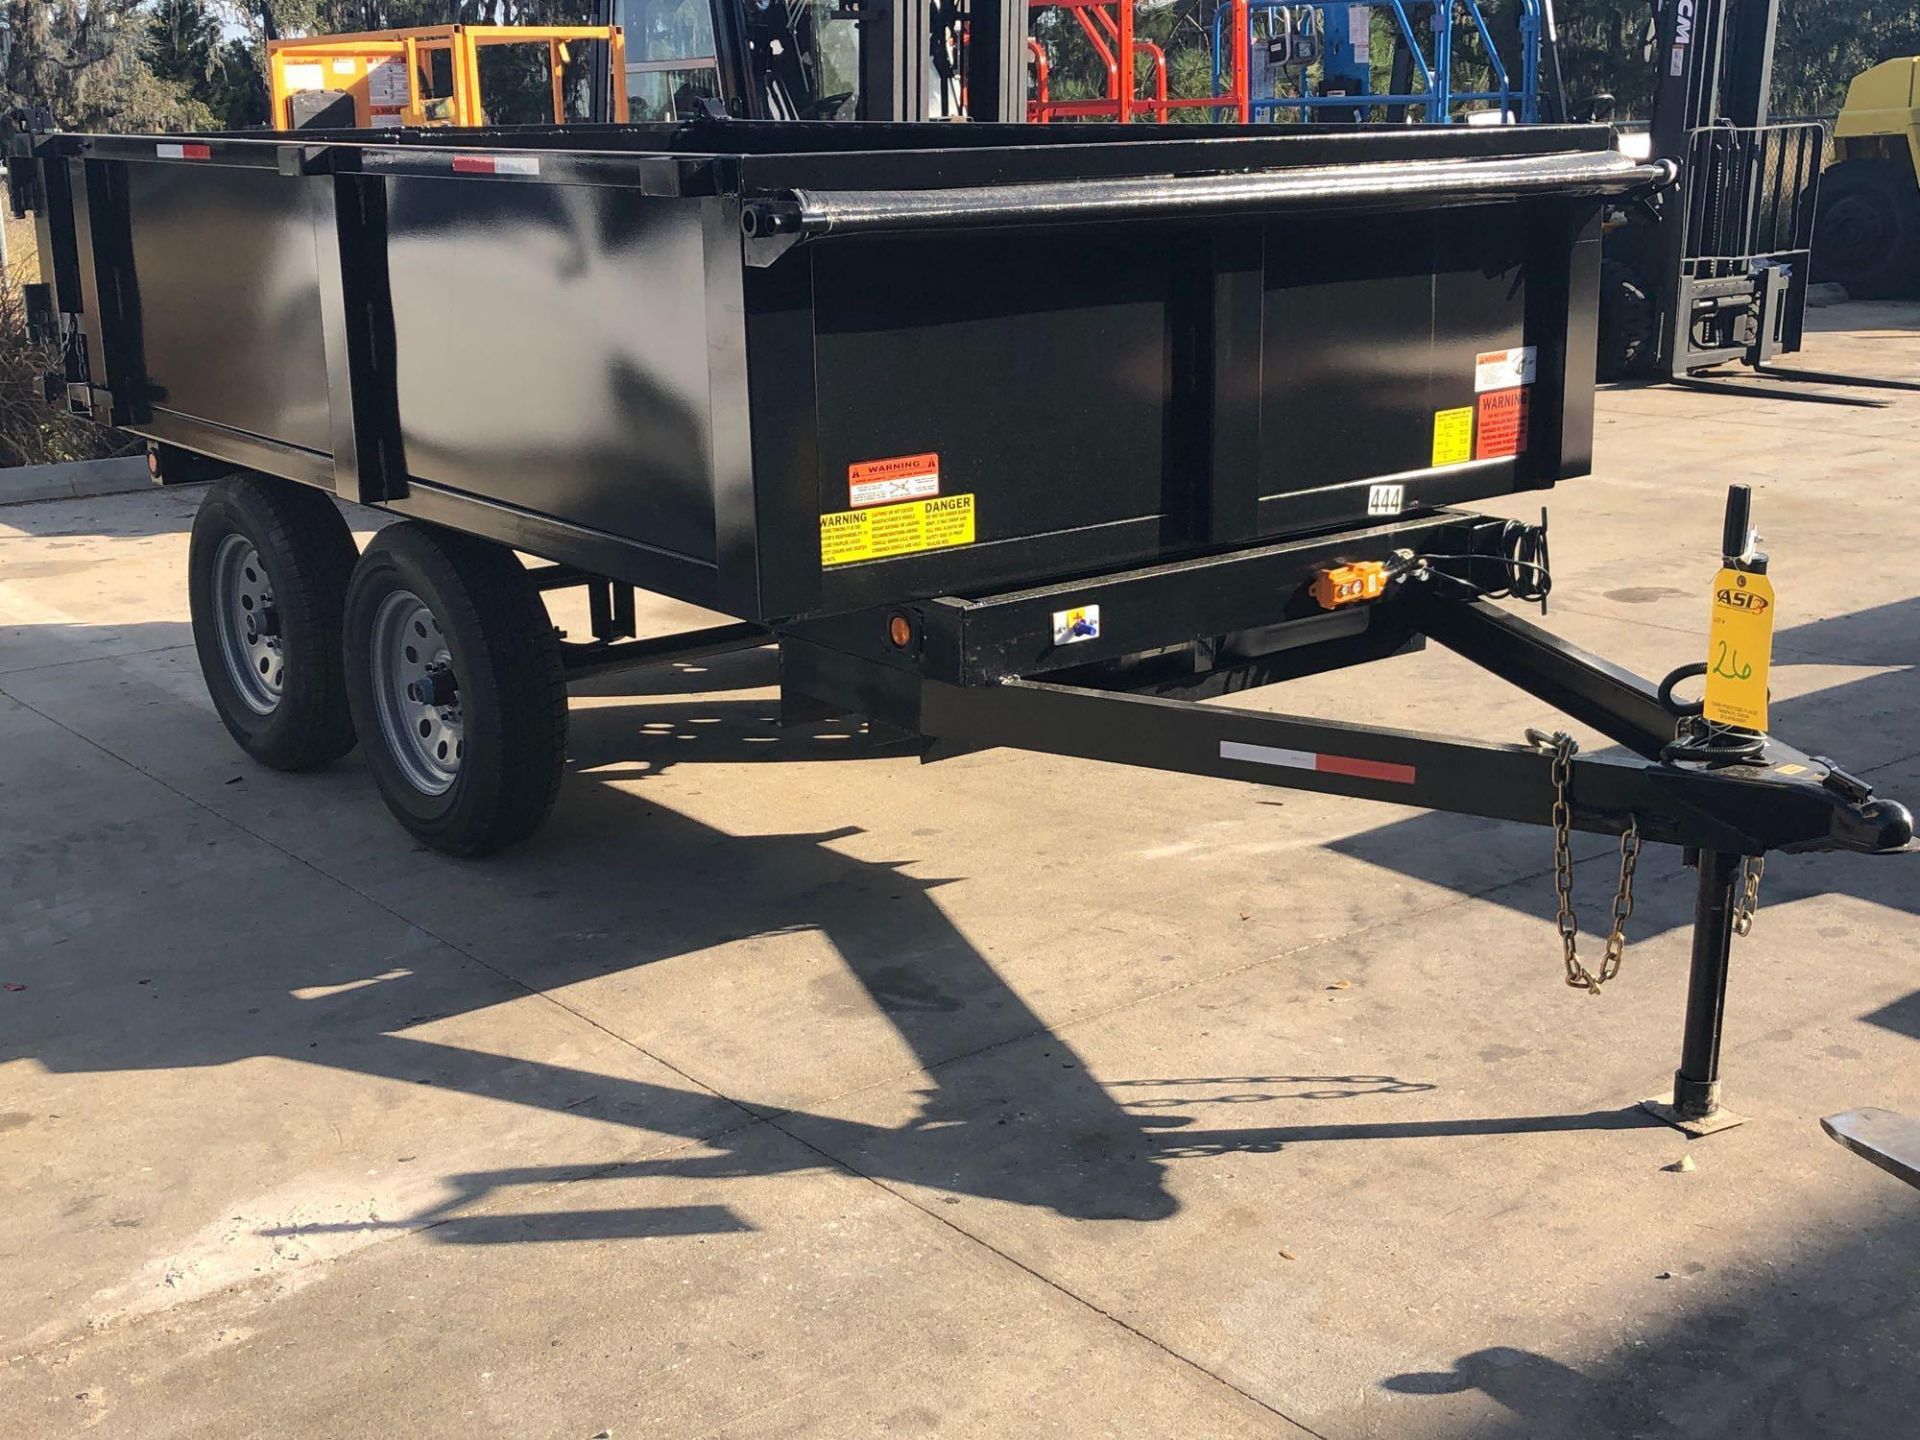 2019 SS DUMP TRIALER W/ ELECTRIC REMOTE, DUAL AXLE, 7,000 LB GVWR - Image 2 of 11